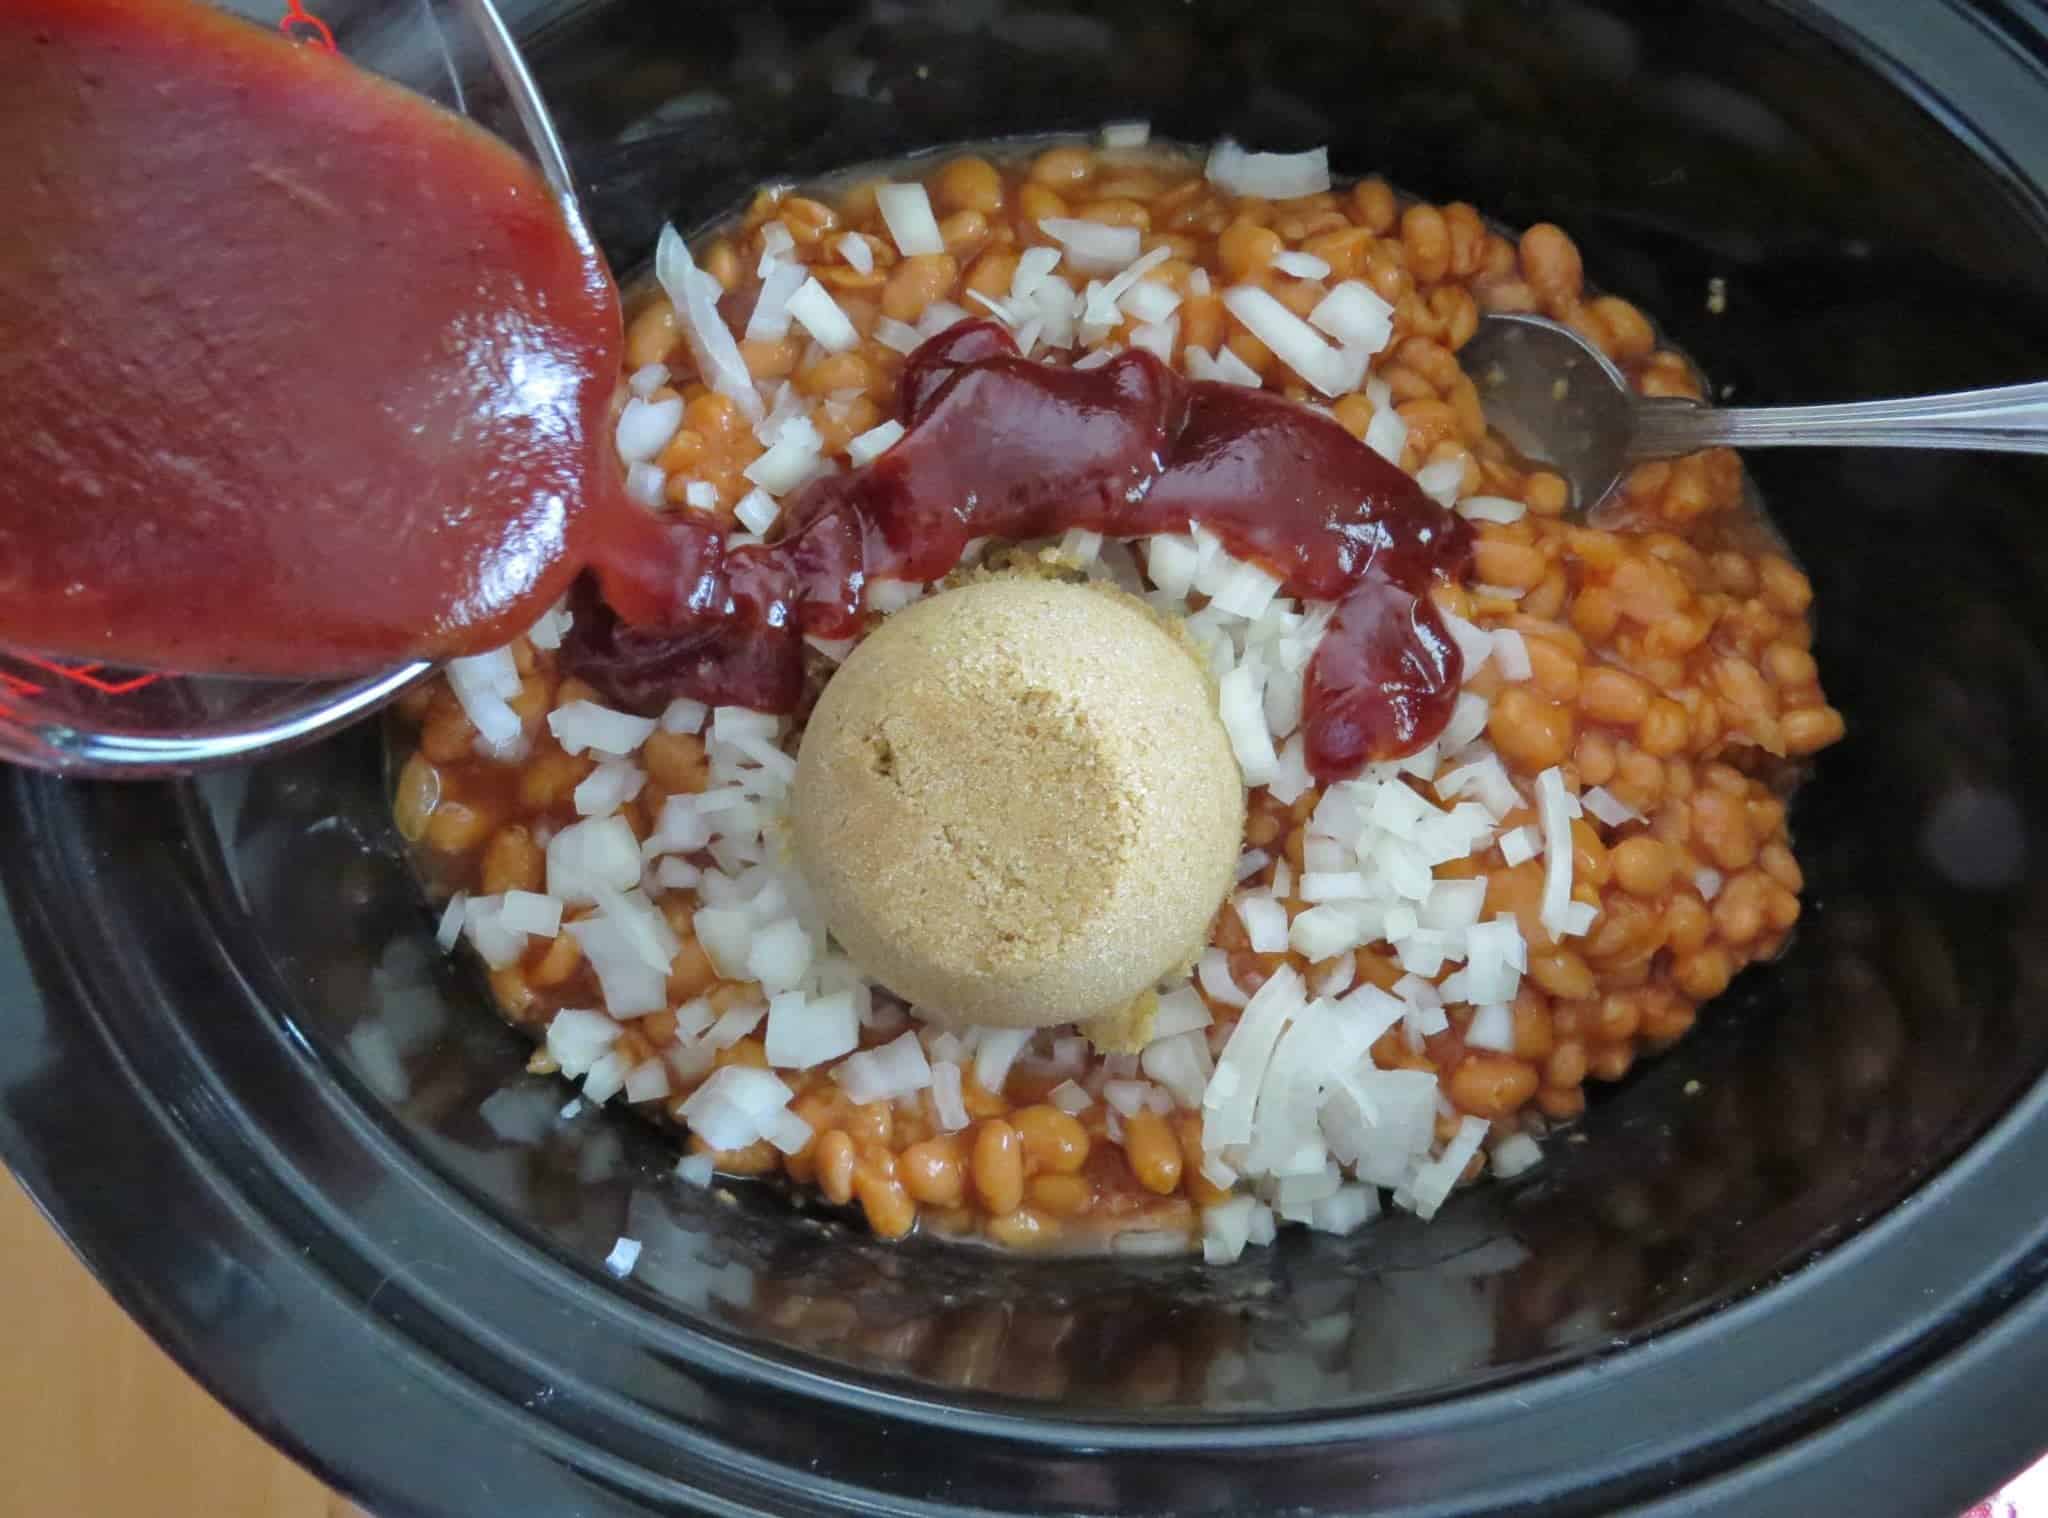 barbecue sauce shown being poured in a crock pot with pork and beans.